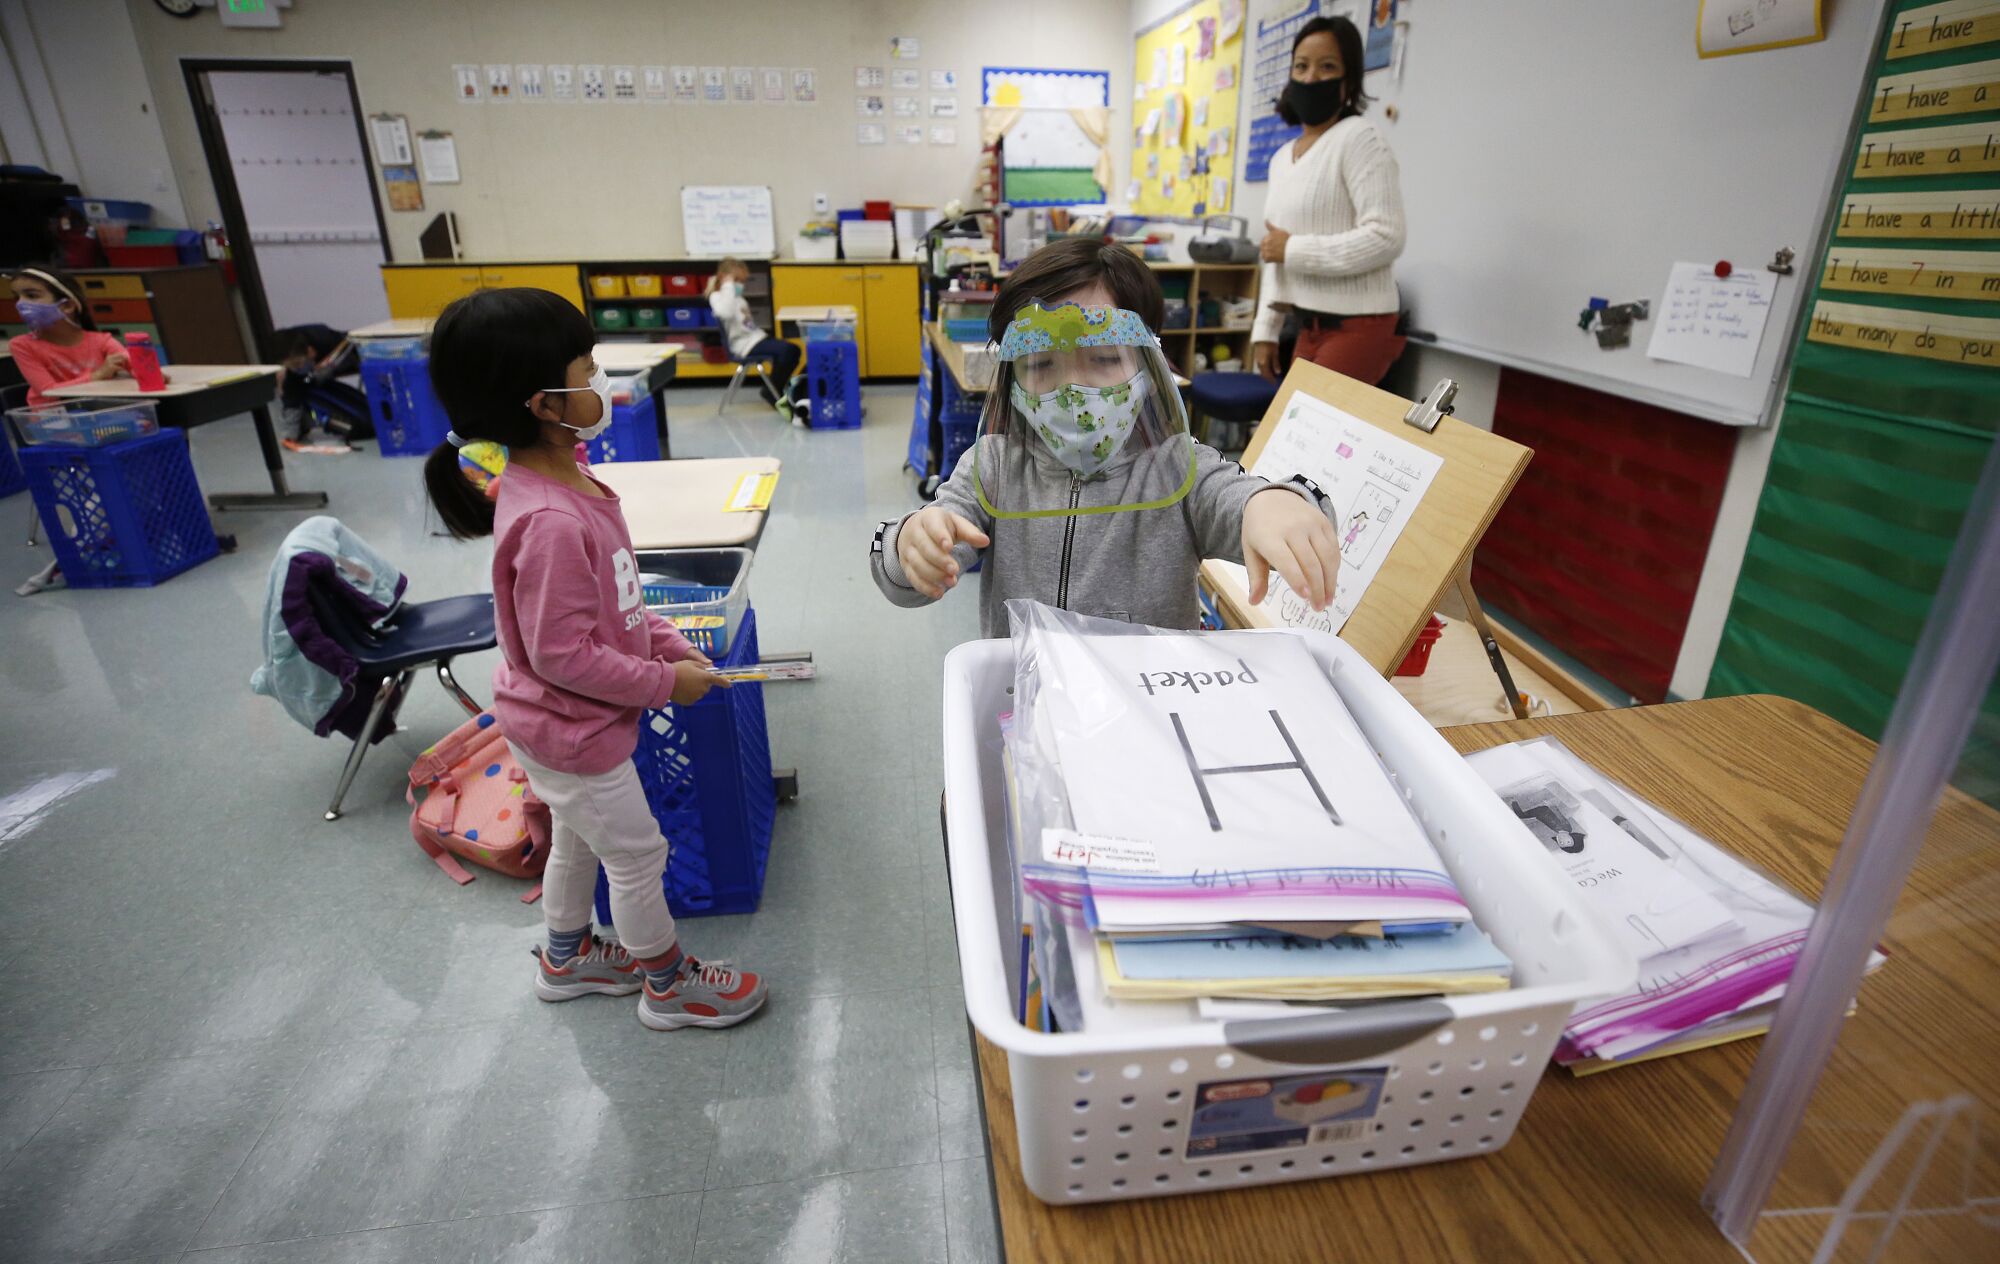 Kindergarten teacher Ursula Dysthe watches as students submit homework at Lupin Hill Elementary.